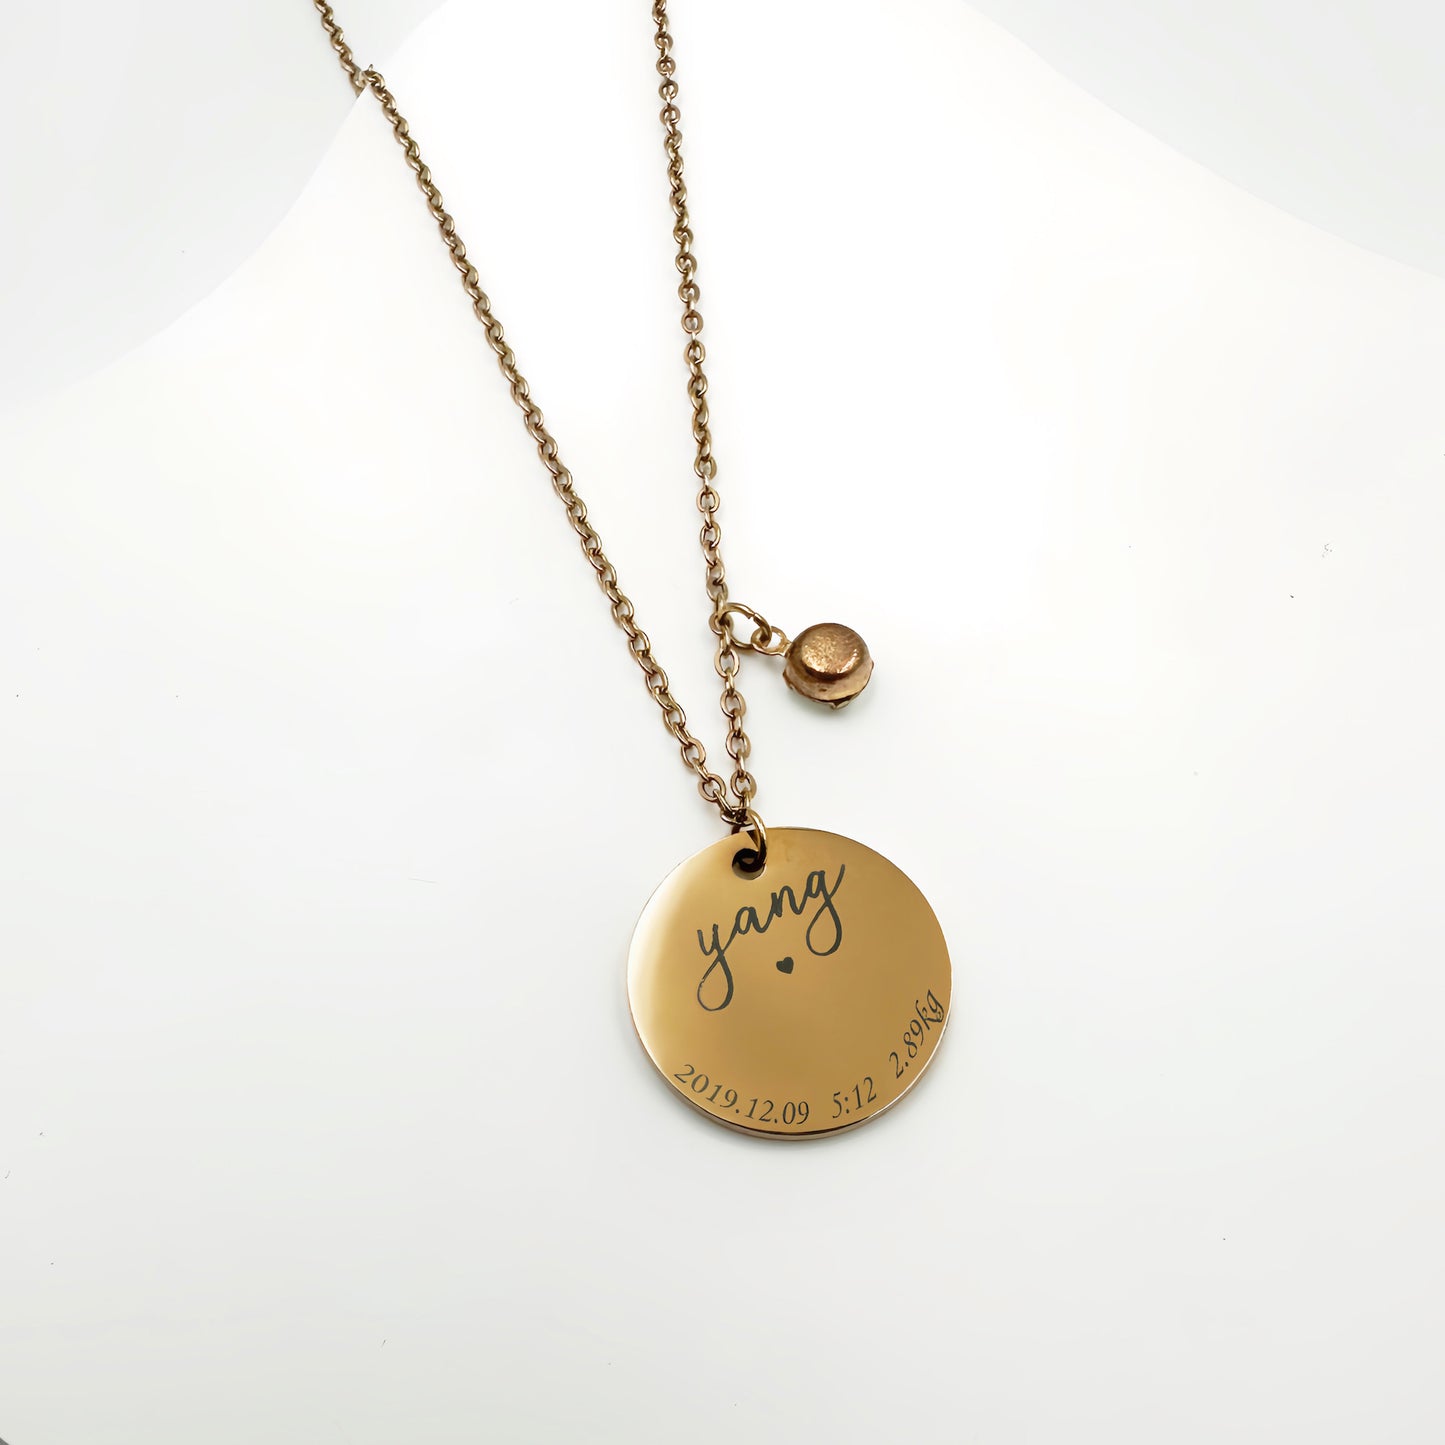 Baby Hand Print and Foot Print Necklaces